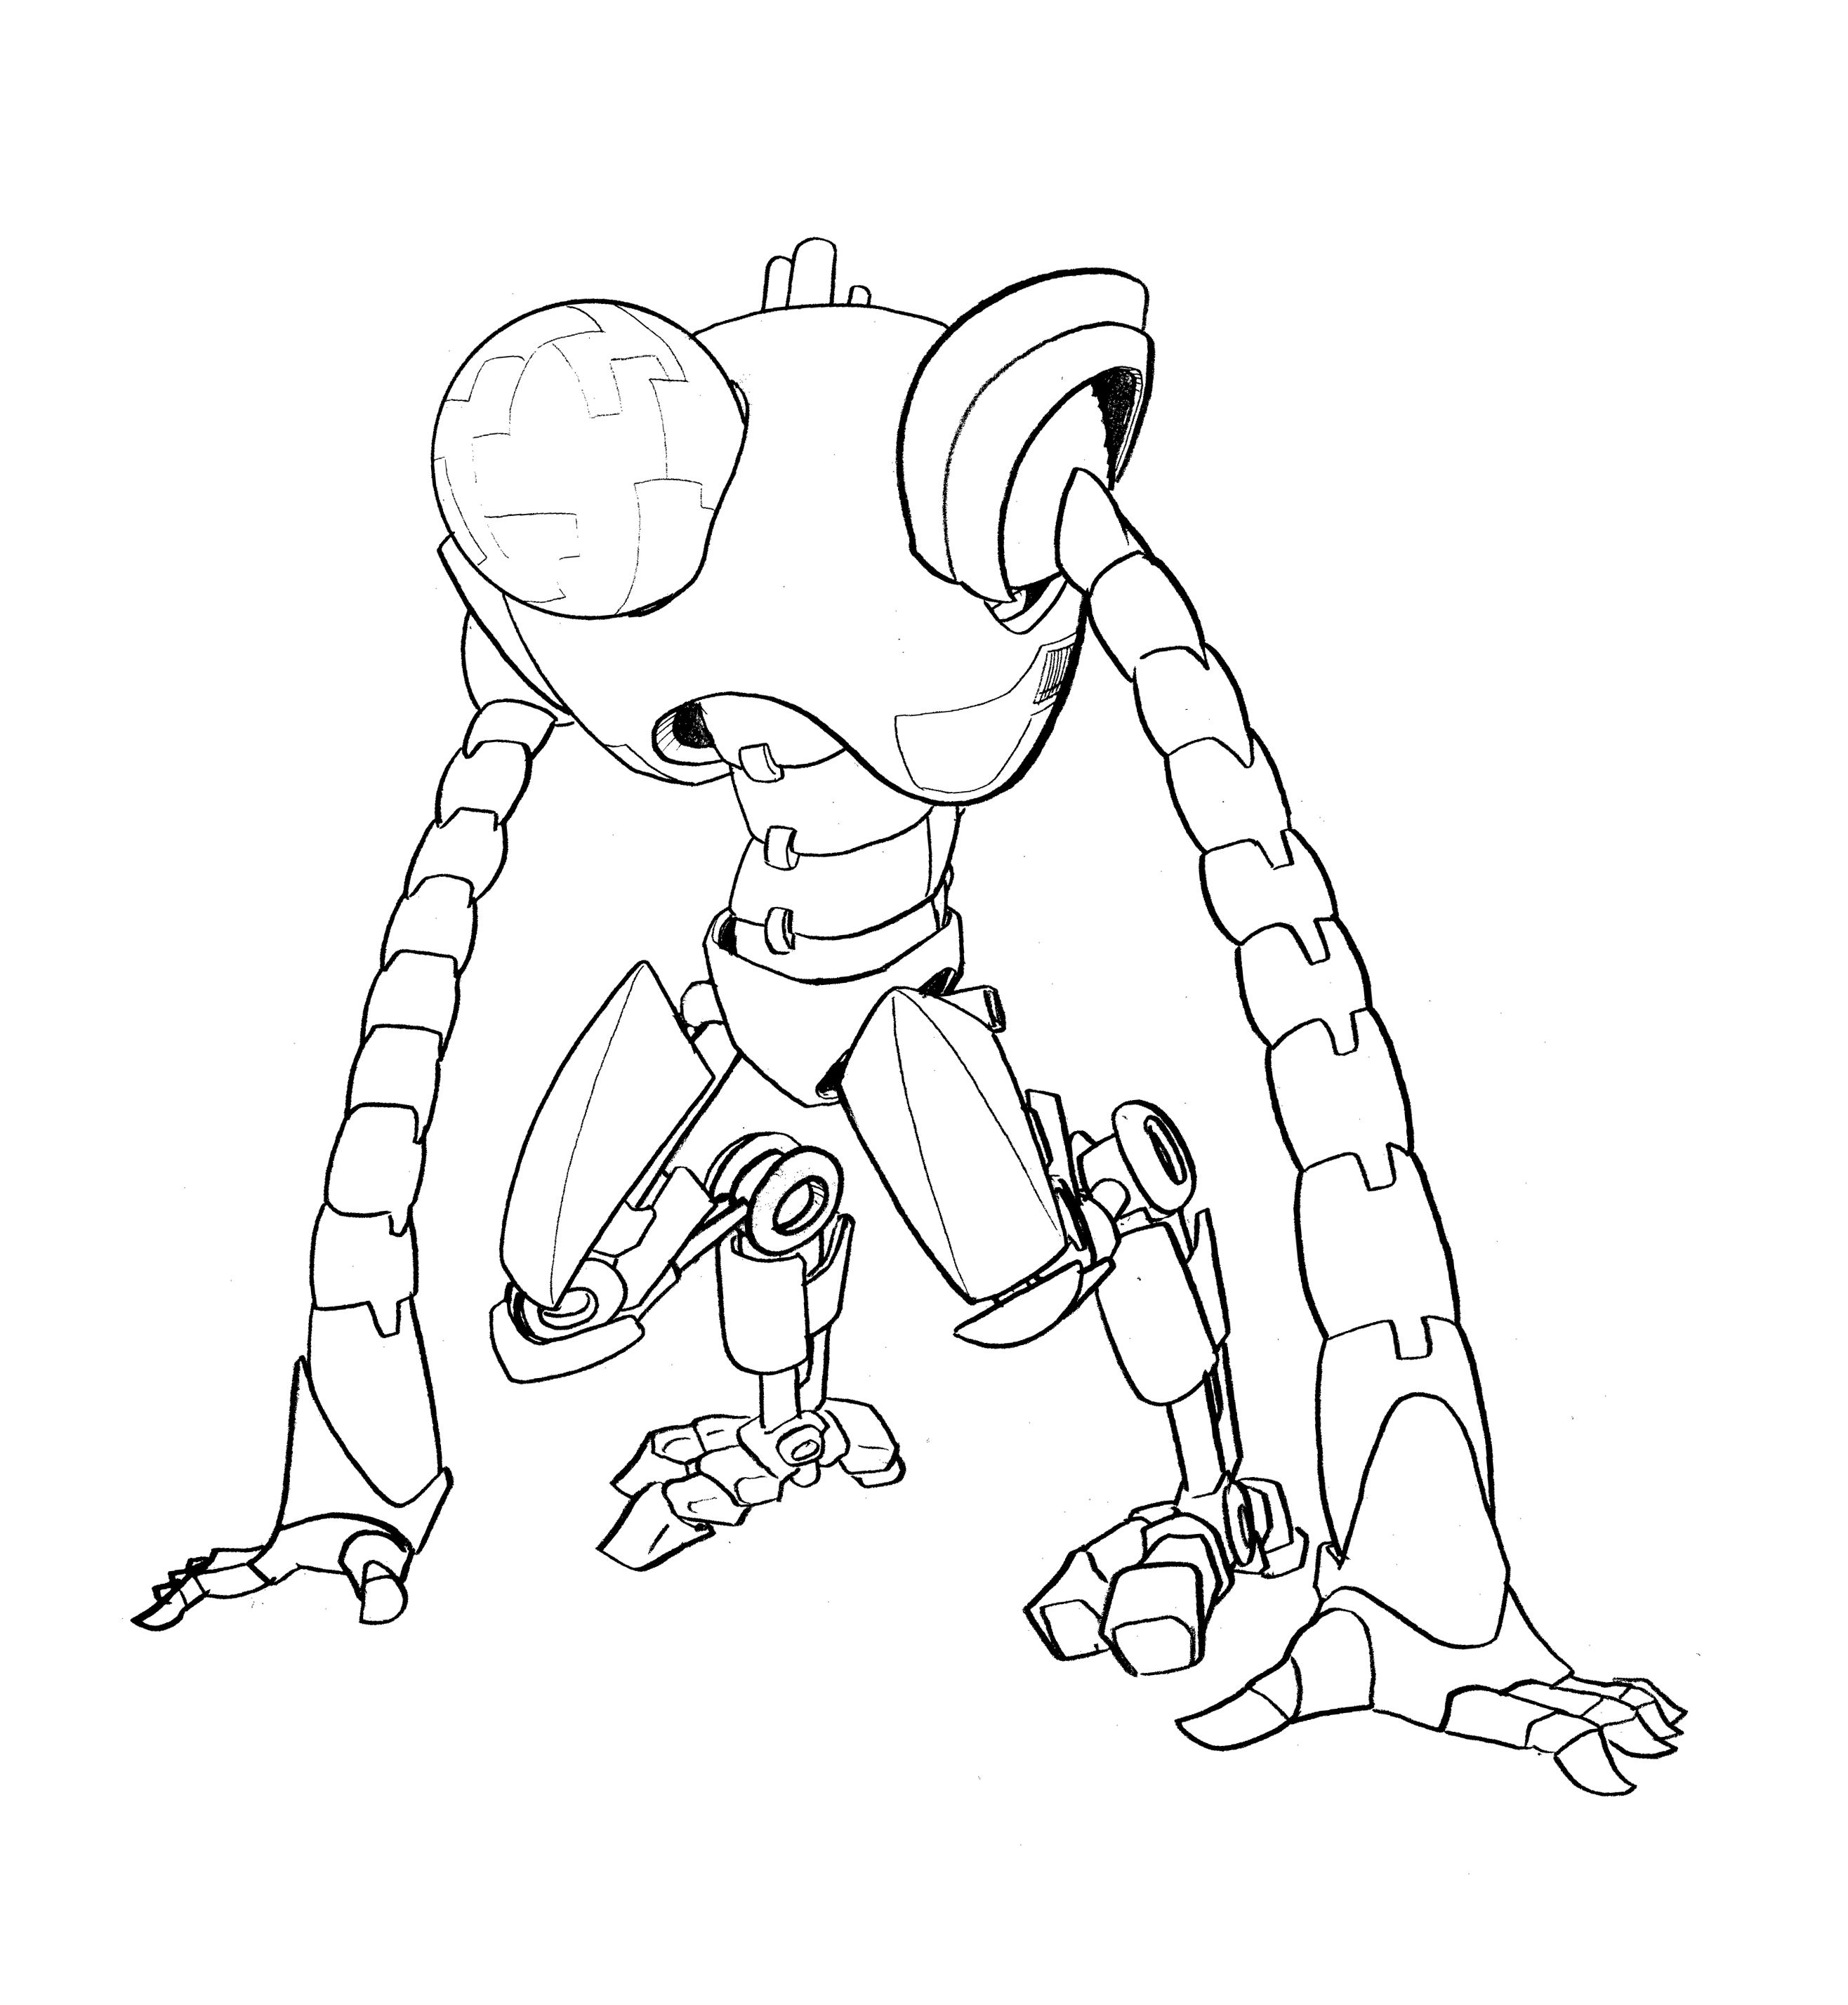 Awesome Robot Drawing at GetDrawings Free download